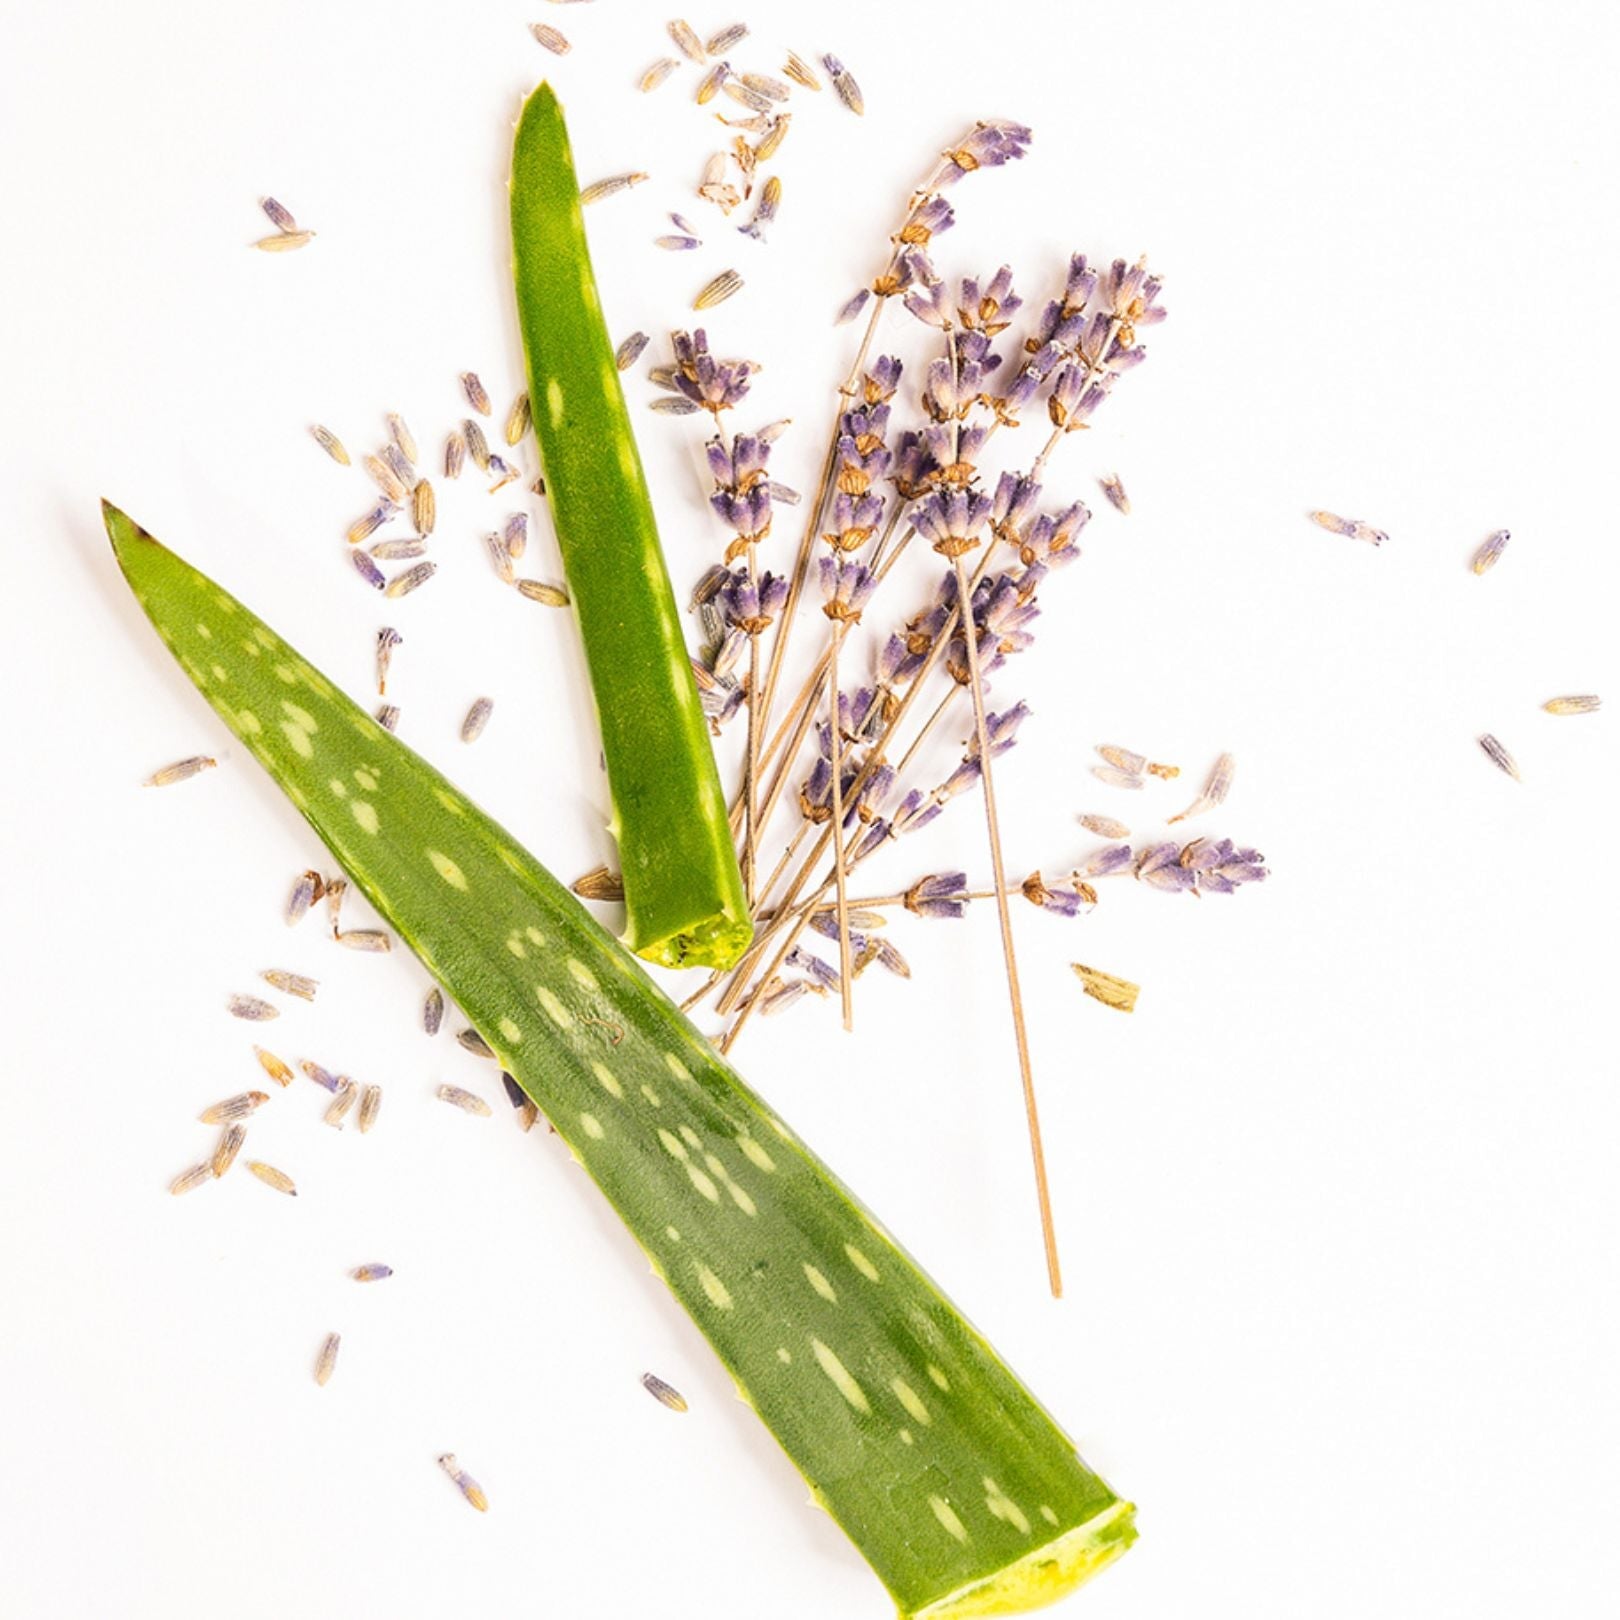 lavender and aloe vera on a white background